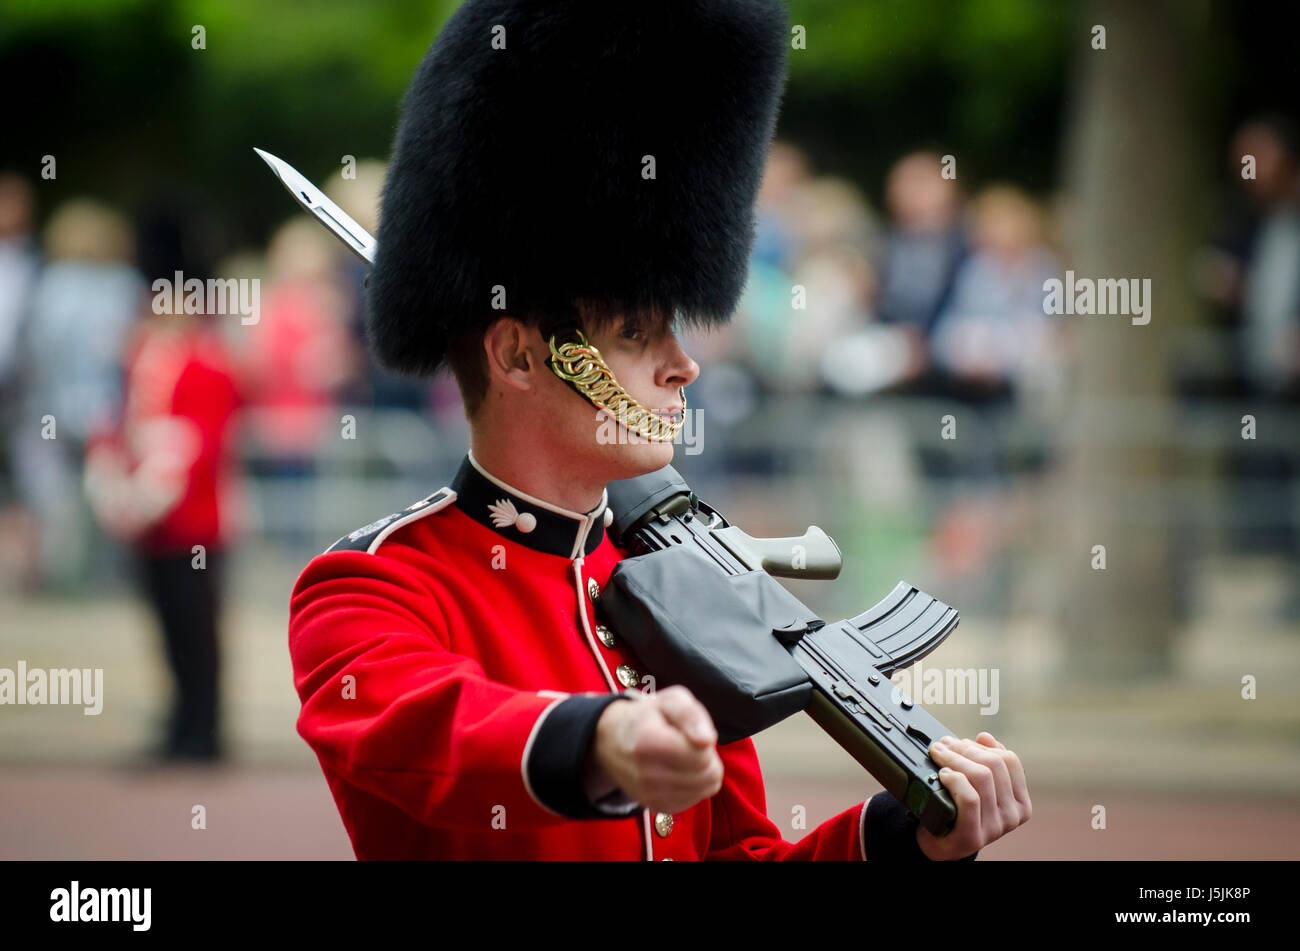 LONDON - JUNE 13, 2015: Royal guard in traditional red coat and bear fur busby hat marches down the Mall holding his rifle in a parade of pageantry. Stock Photo